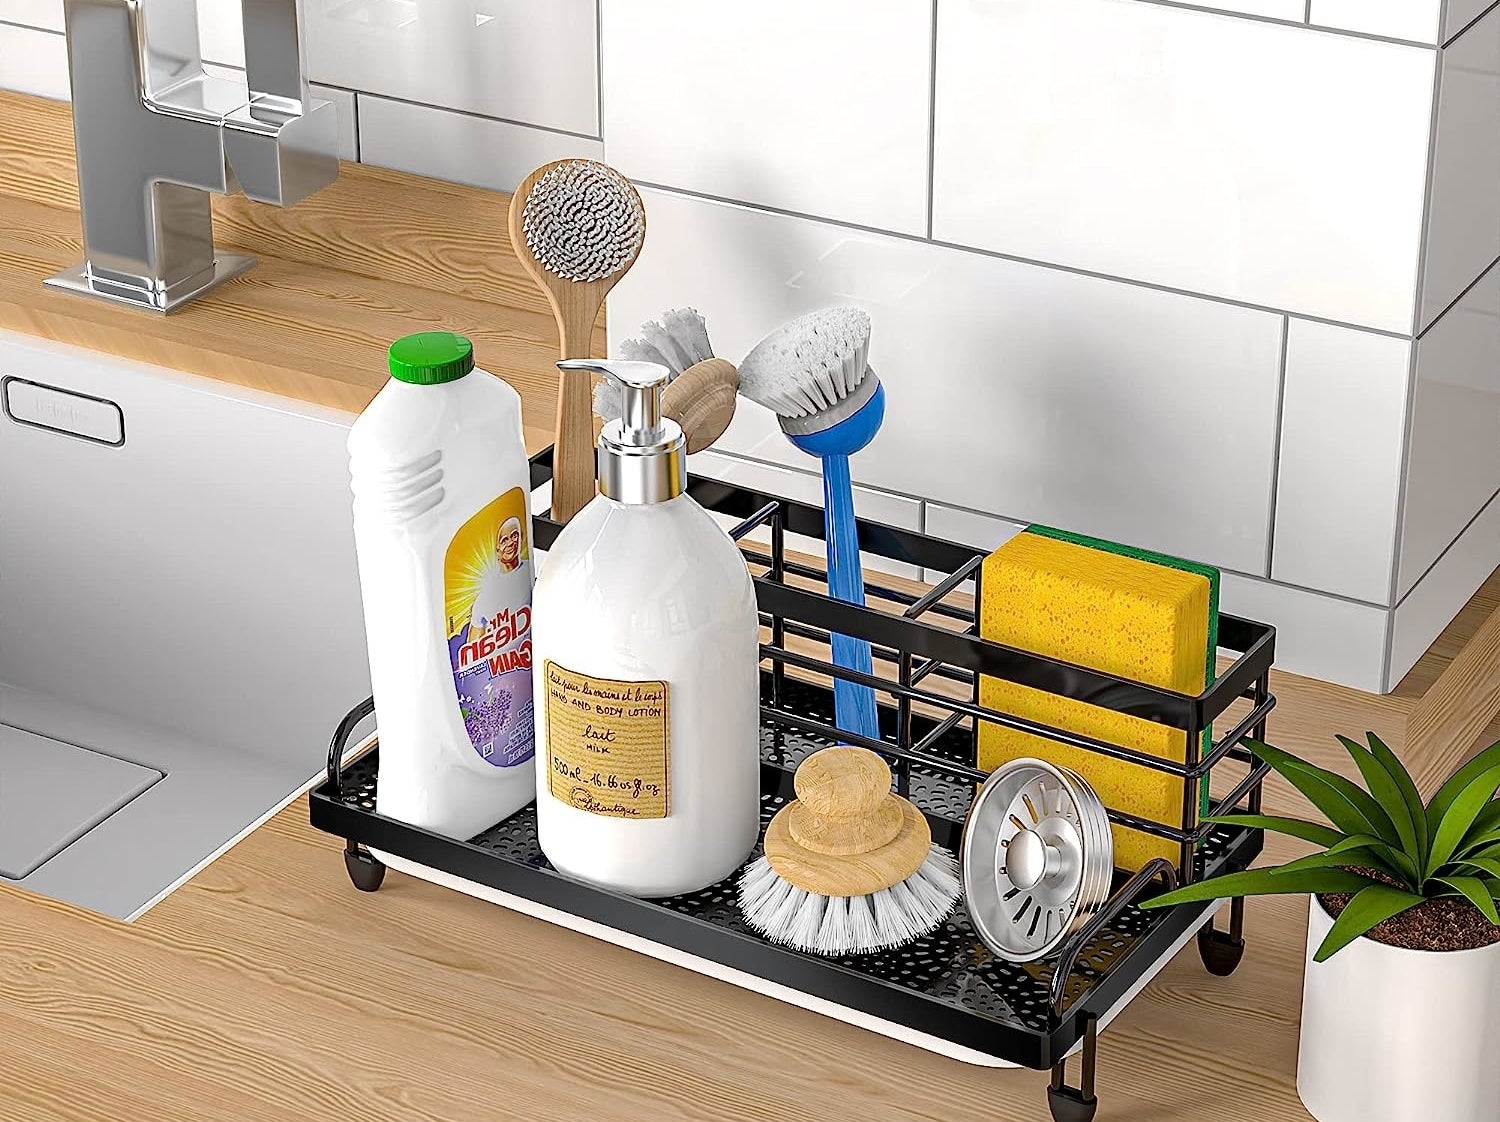 various products like a sponge, soap, scrubber brush, and sink strainer in the organizer